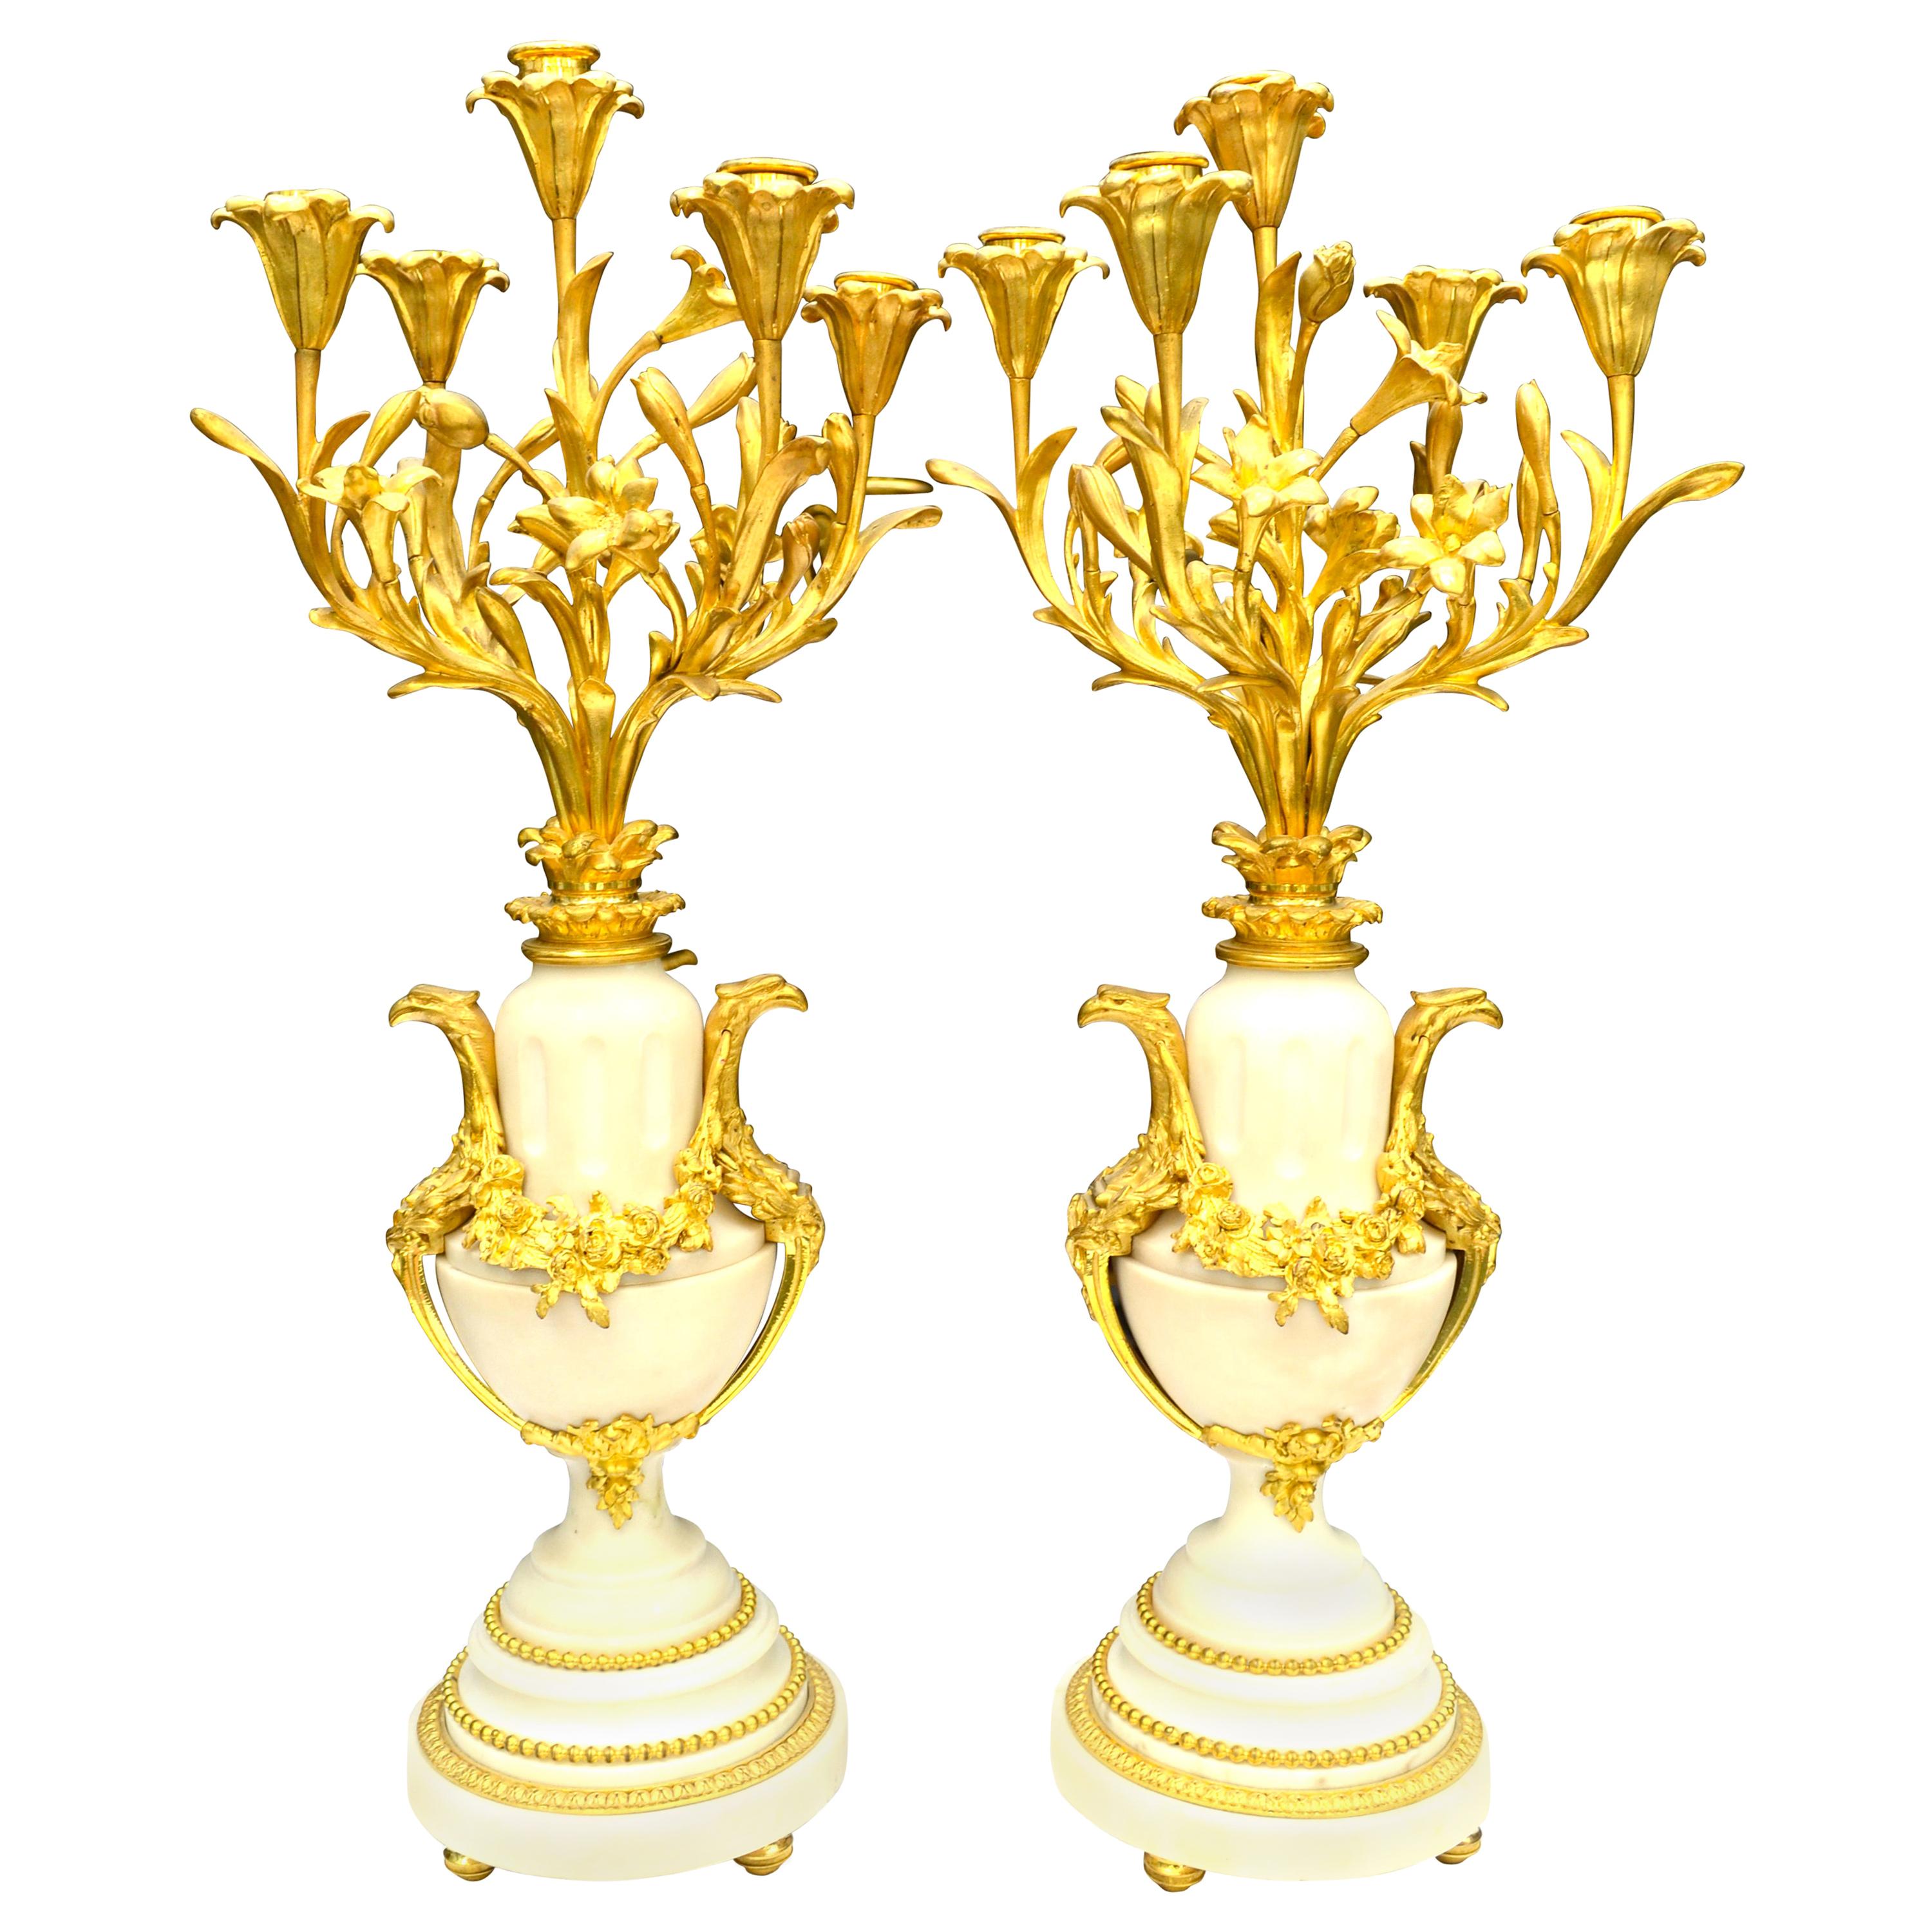 Pair of Louis XVI Gilt Bronze and White Marble Five-Arm Candelabra